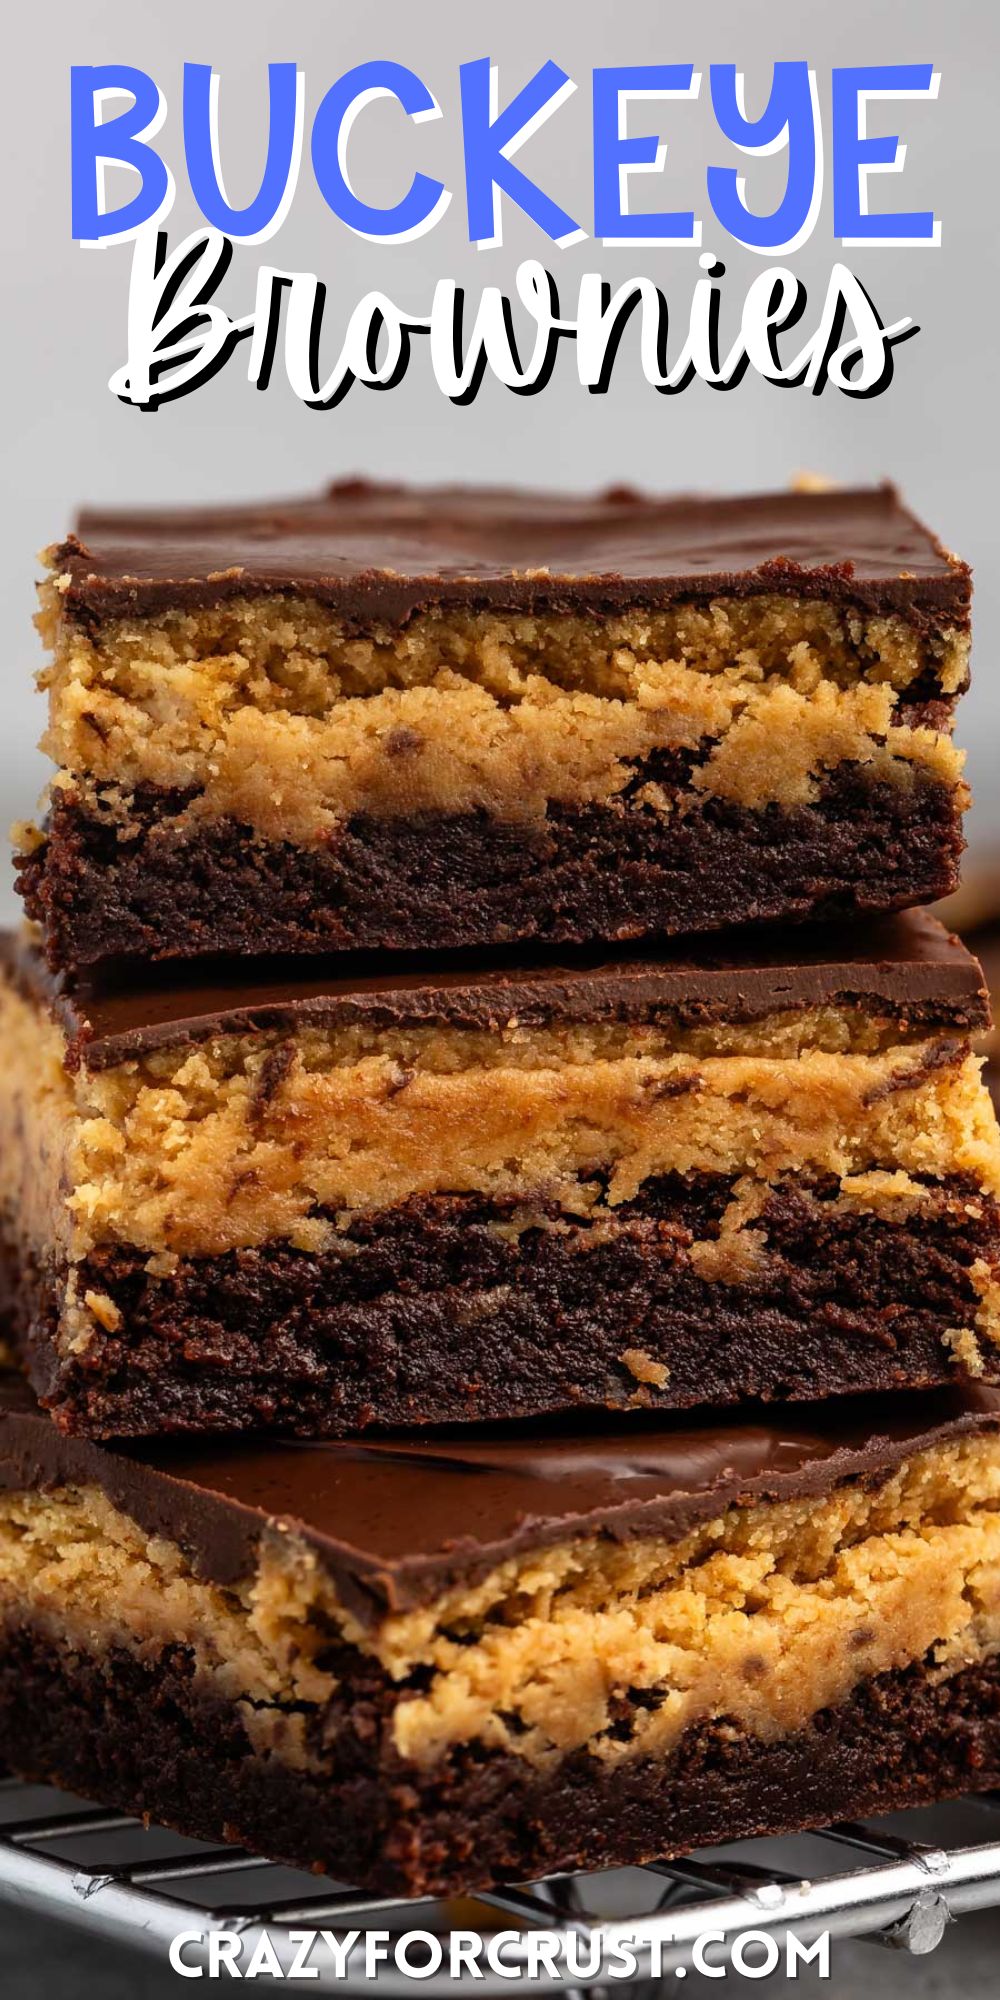 stacked chocolate brownies with peanut butter with words on the image.